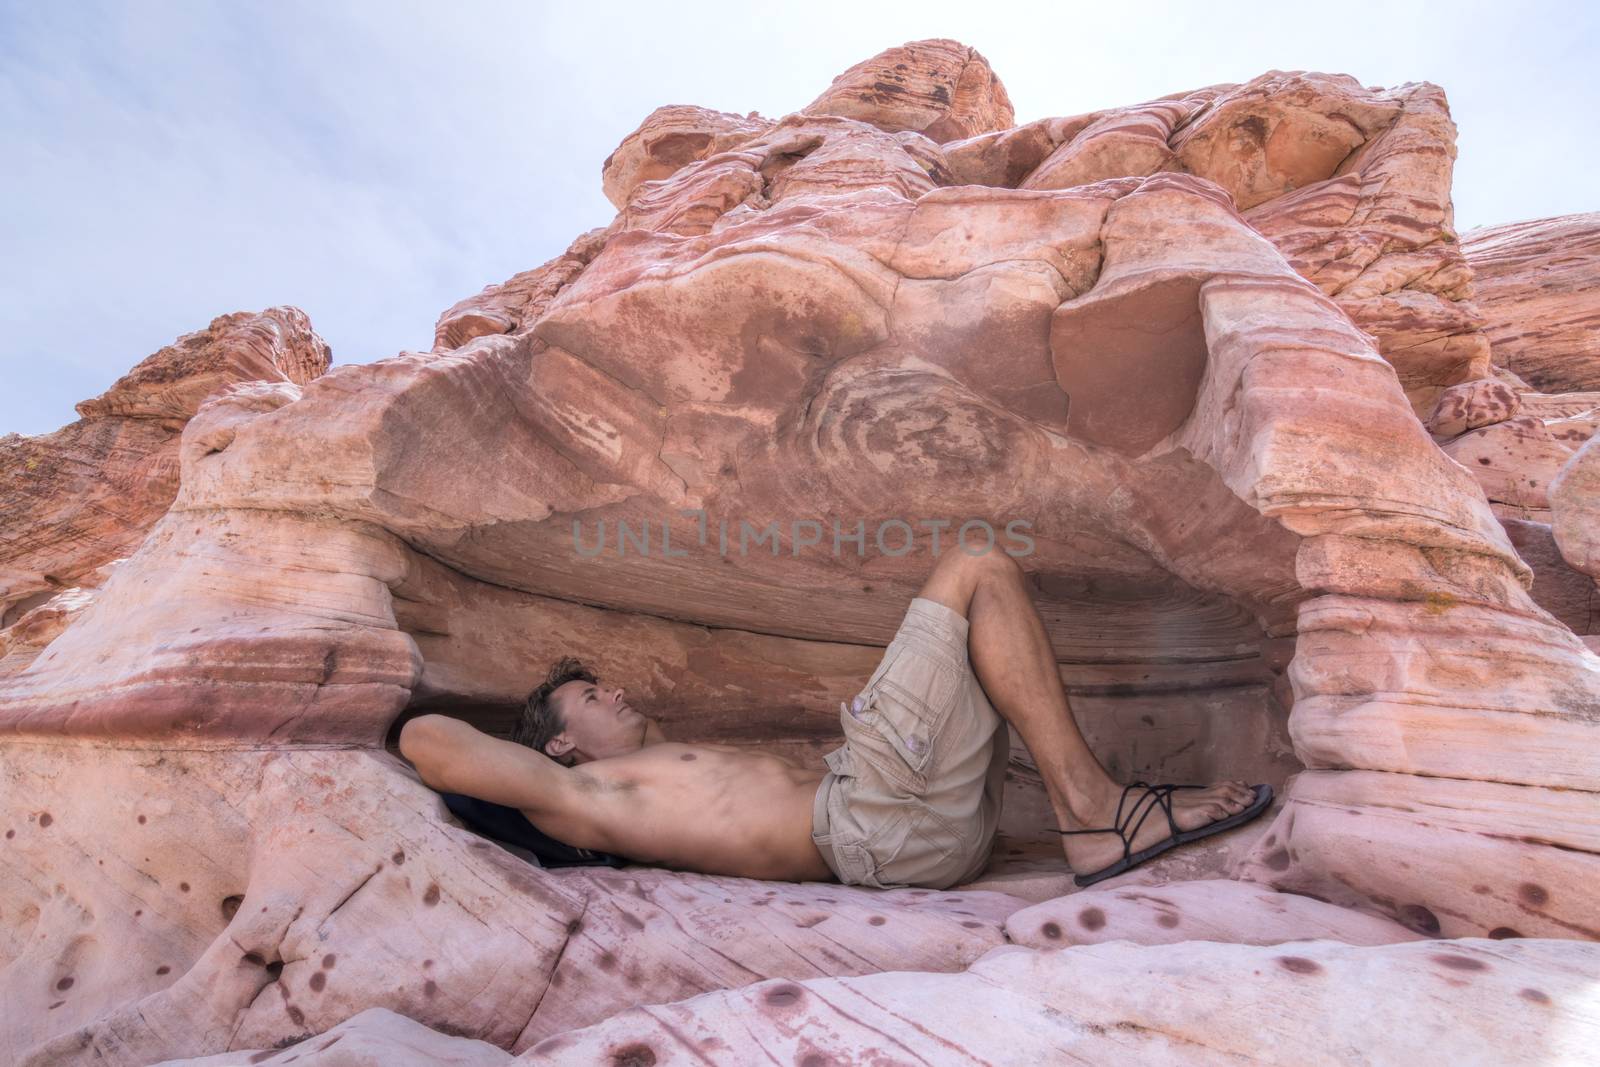 Caucasian male hiker takes refuge from hot desert sun in a shallow cave in Red Rock Canyon, Las Vegas